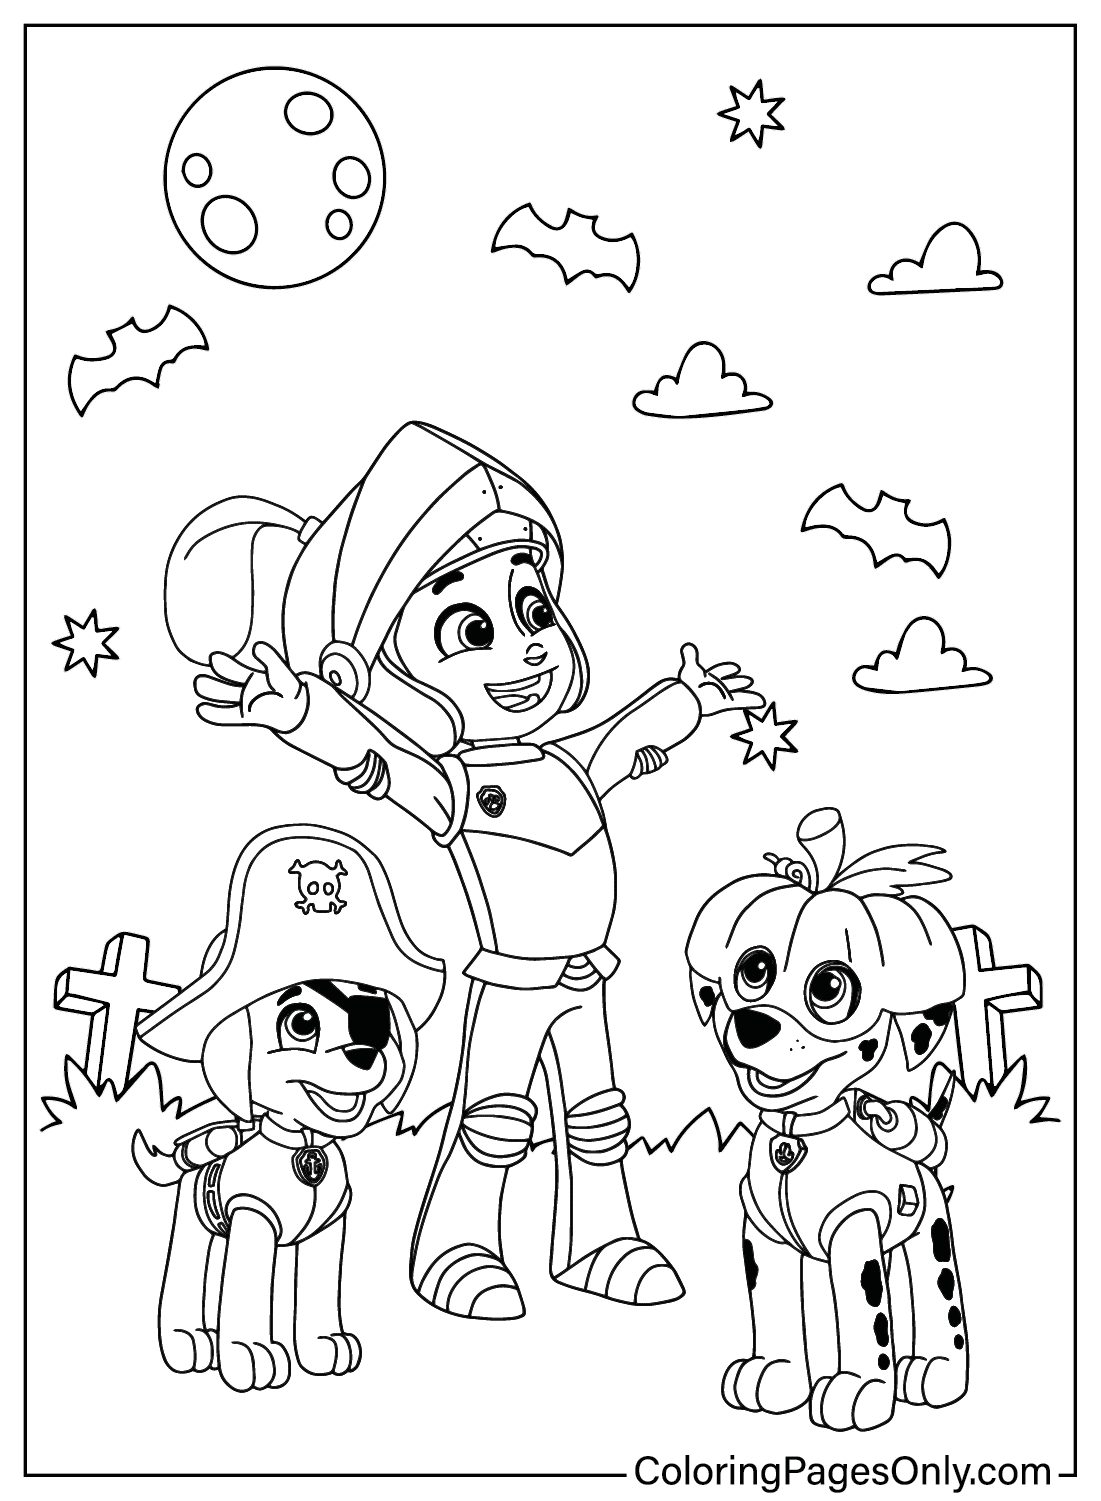 Paw Patrol Halloween Picture to Color from Paw Patrol Halloween